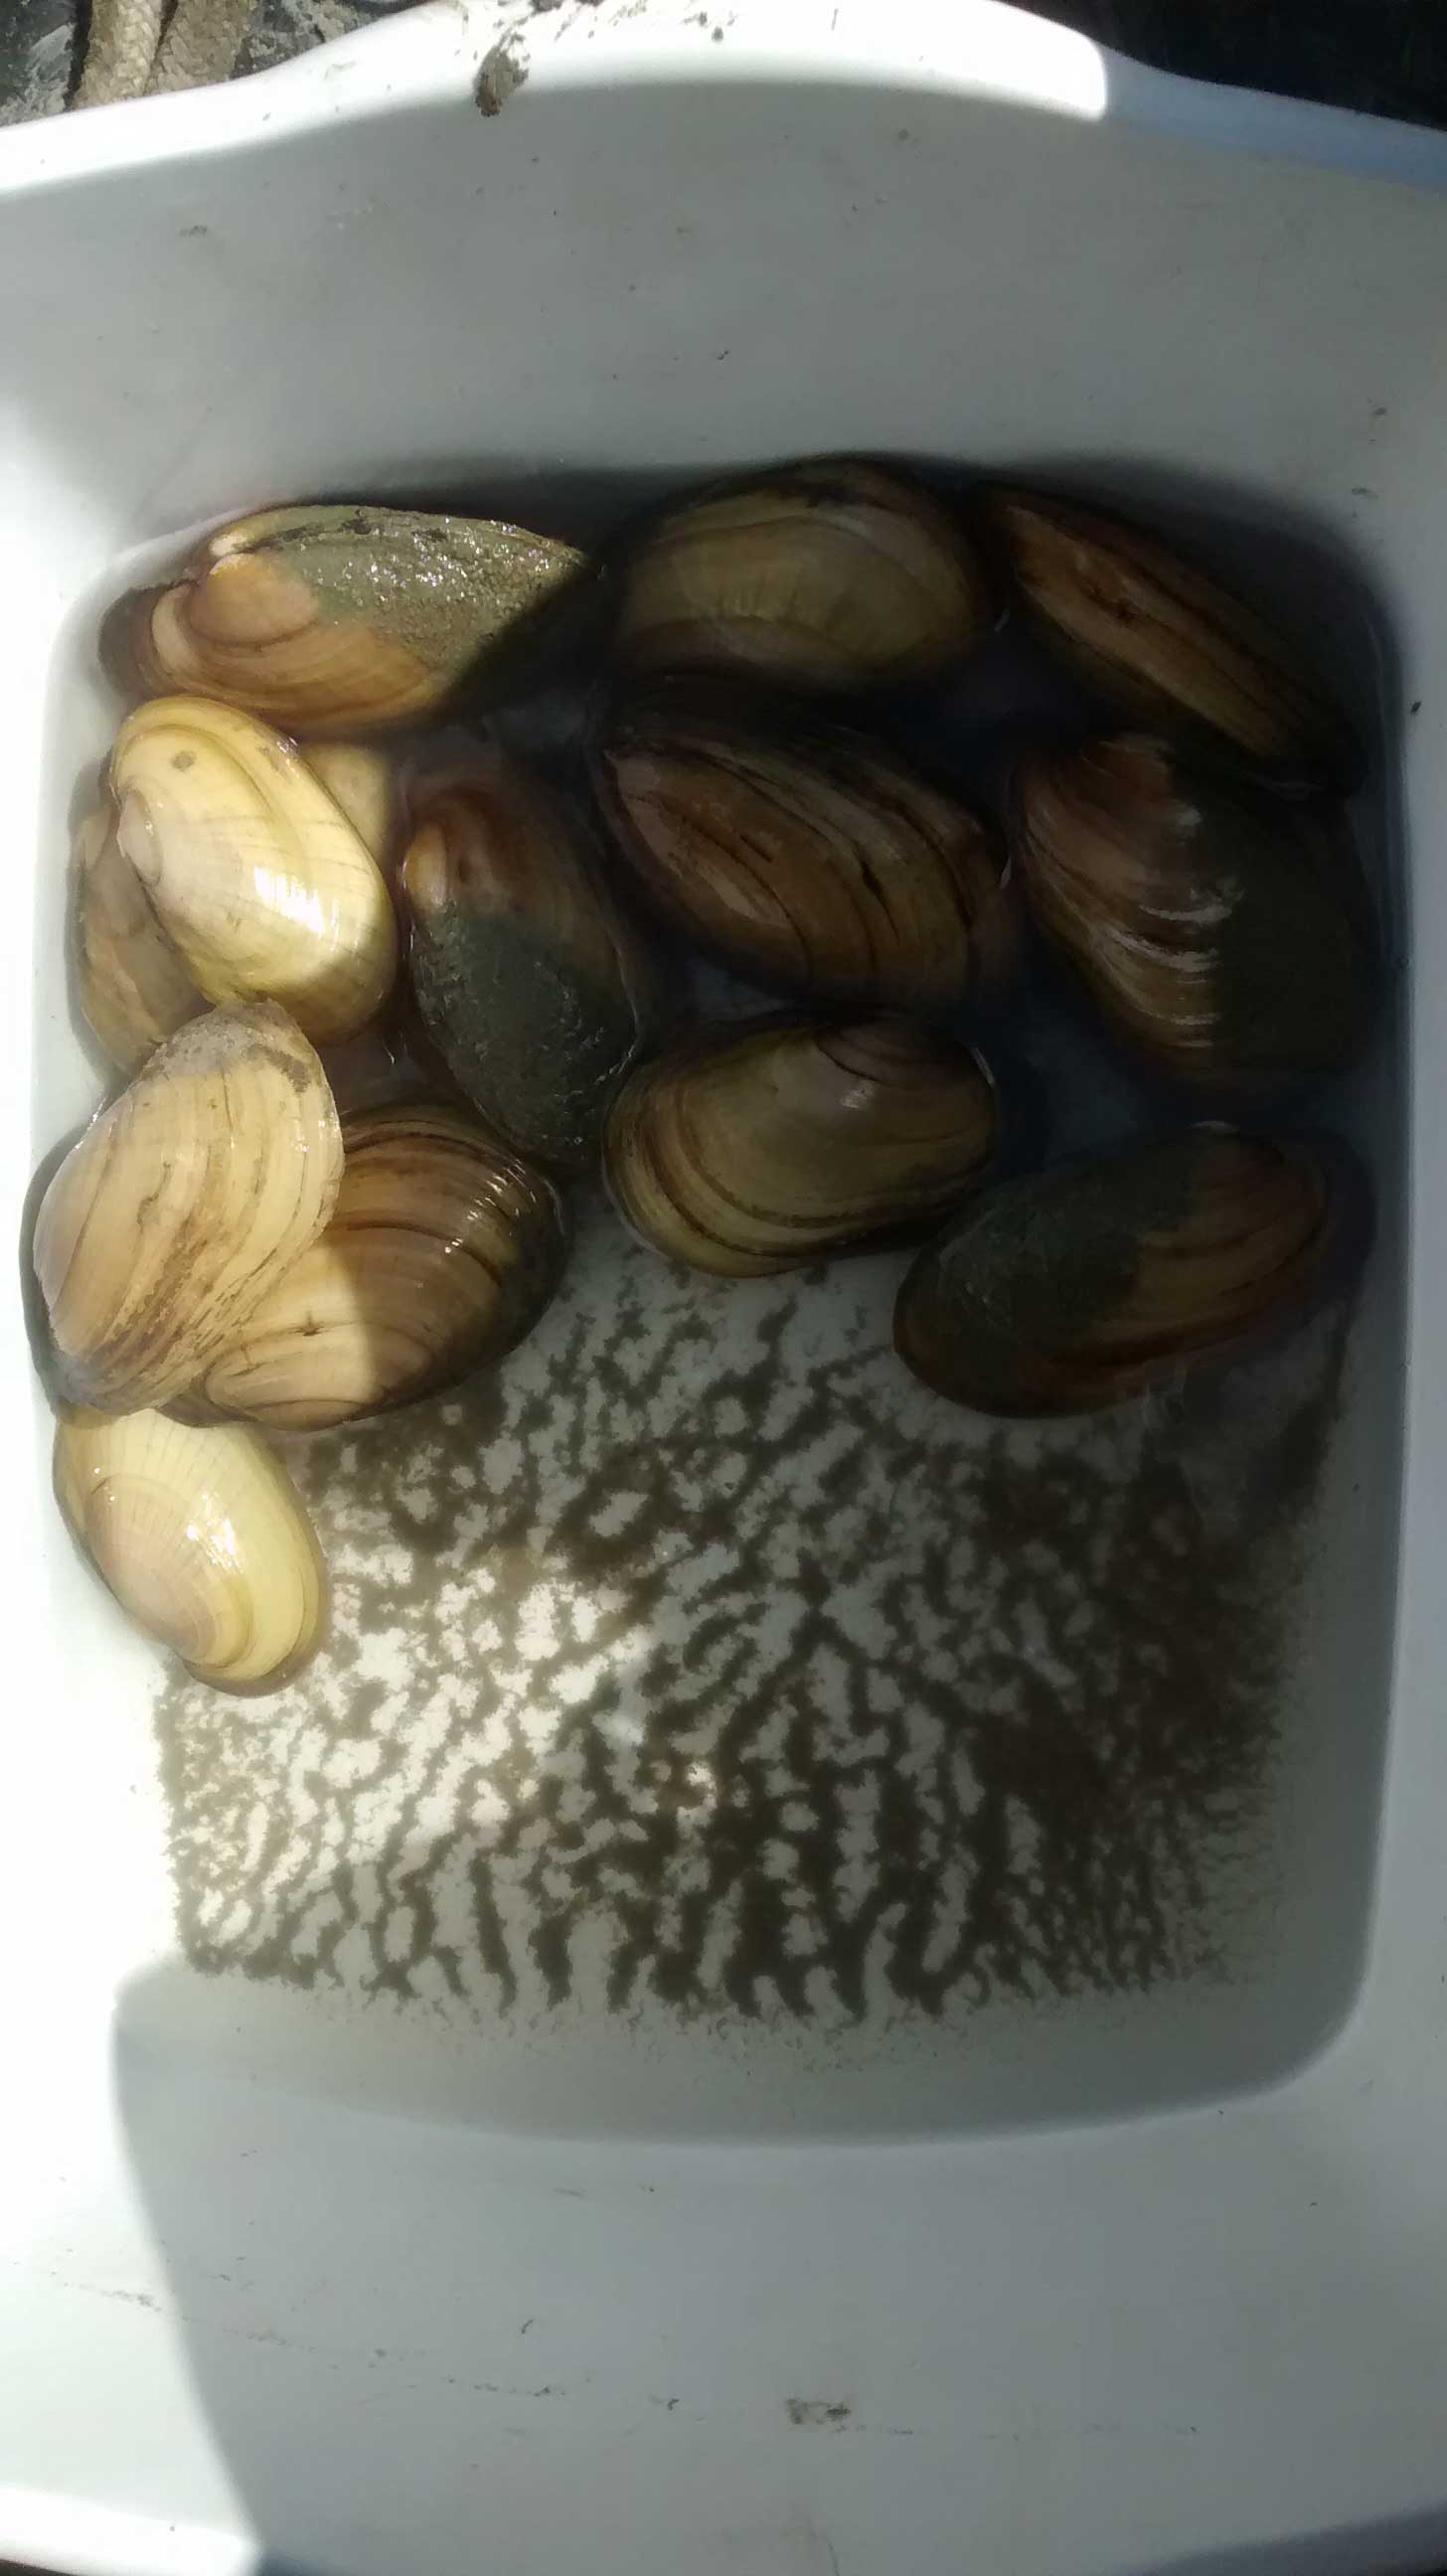 Fatmucket mussels (Lampsilis siliquoidea) to be tested for polycyclic aromatic hydrocarbons